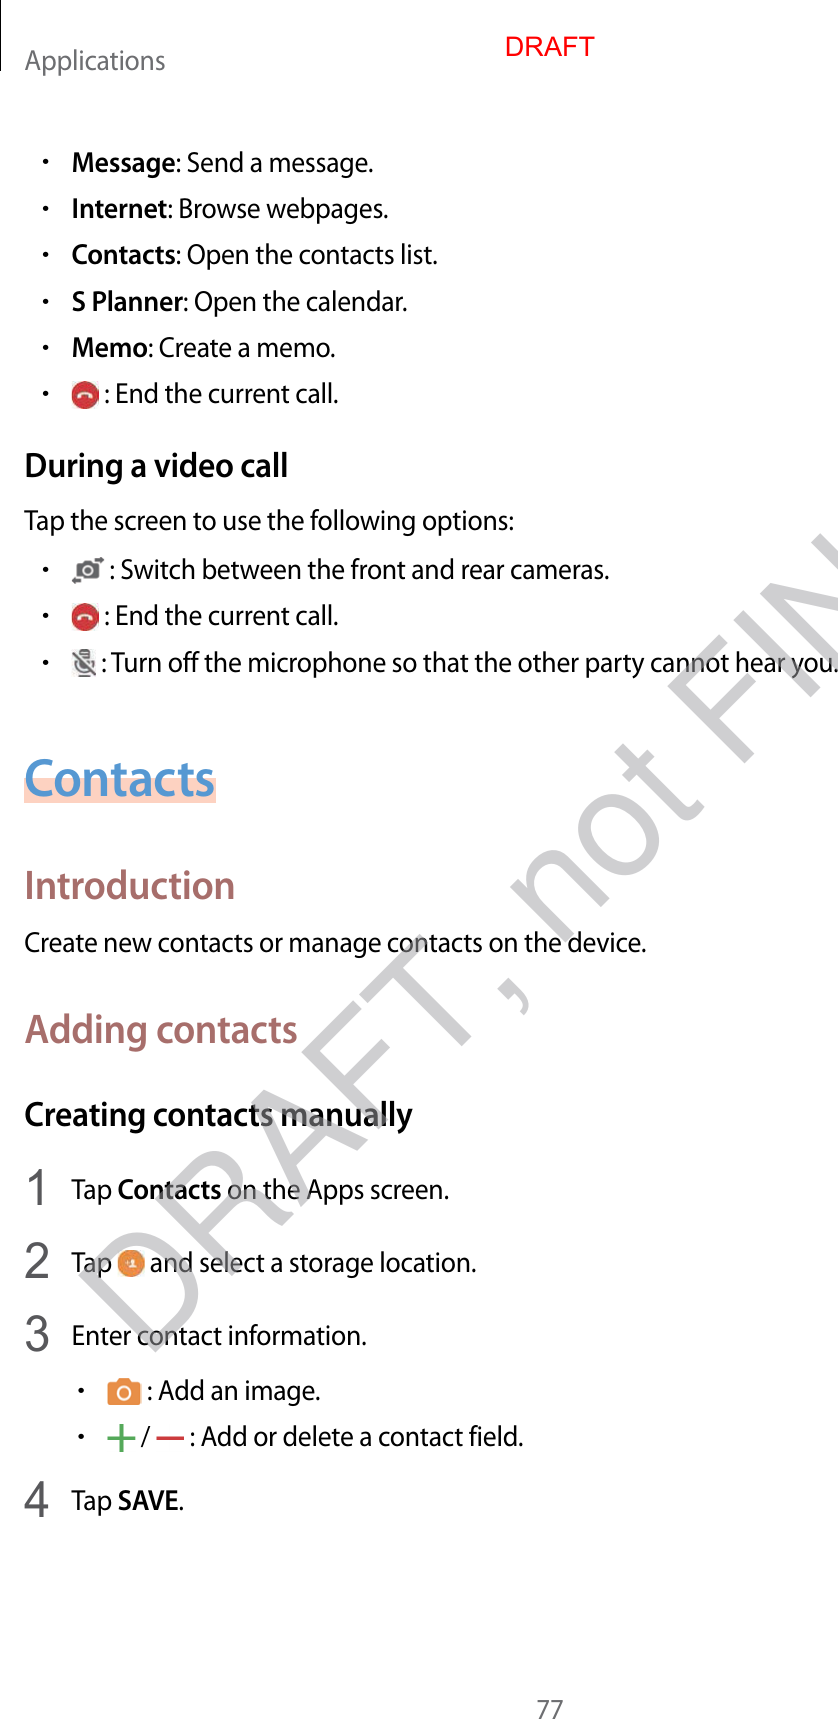 Applications77•Message: Send a message.•Internet: Browse webpages.•Contacts: Open the contacts list.•S Planner: Open the calendar.•Memo: Create a memo.• : End the current call.During a video callTap the screen to use the following options:• : Switch between the front and rear cameras.• : End the current call.• : Turn off the microphone so that the other party cannot hear you.ContactsIntroductionCreate new contacts or manage contacts on the device.Adding contactsCreating contacts manually1  Tap Contacts on the Apps screen.2  Tap   and select a storage location.3  Enter contact information.• : Add an image.• /   : Add or delete a contact field.4  Tap SAVE.DRAFTDRAFT, not FINAL